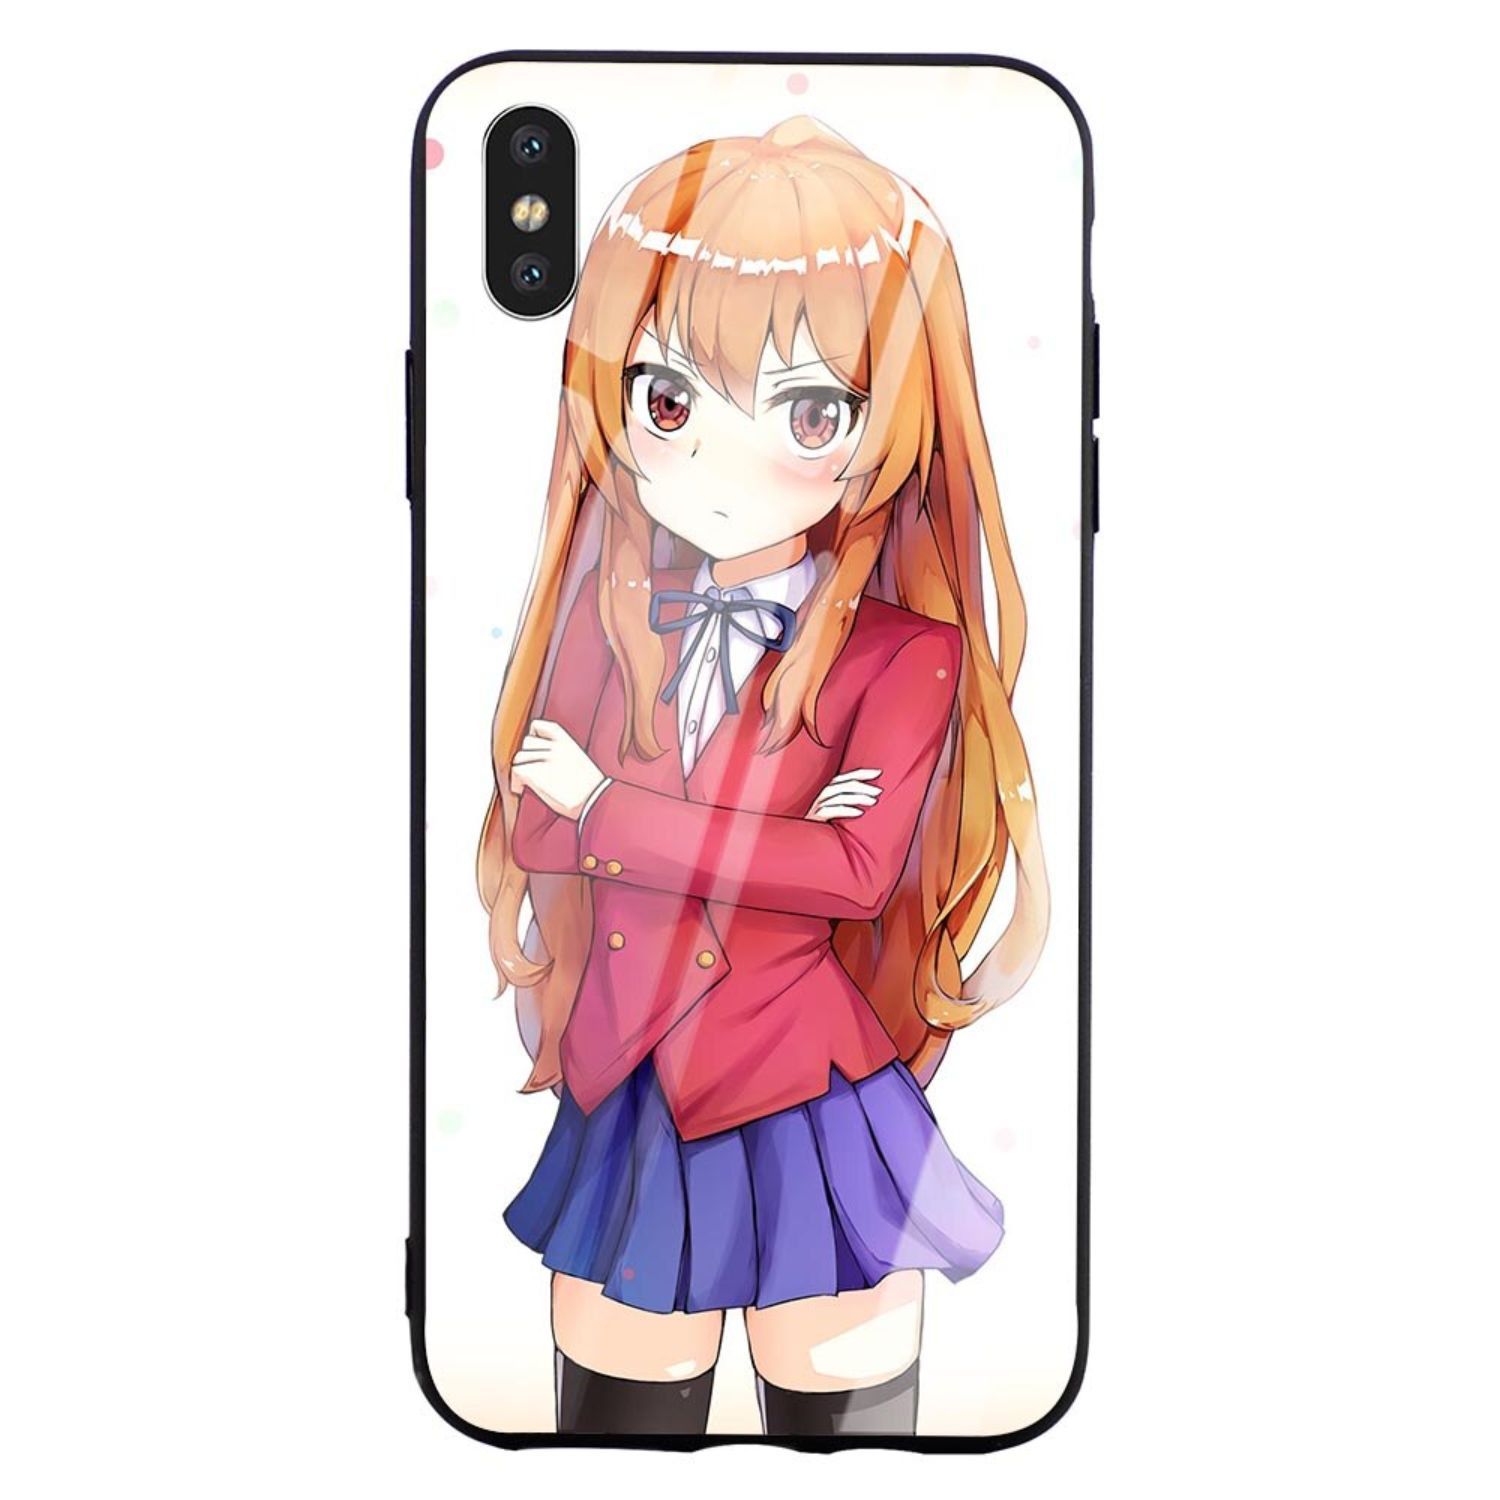 Toradora Anime Tempered Glass Phone Cover Case for iPhone ...